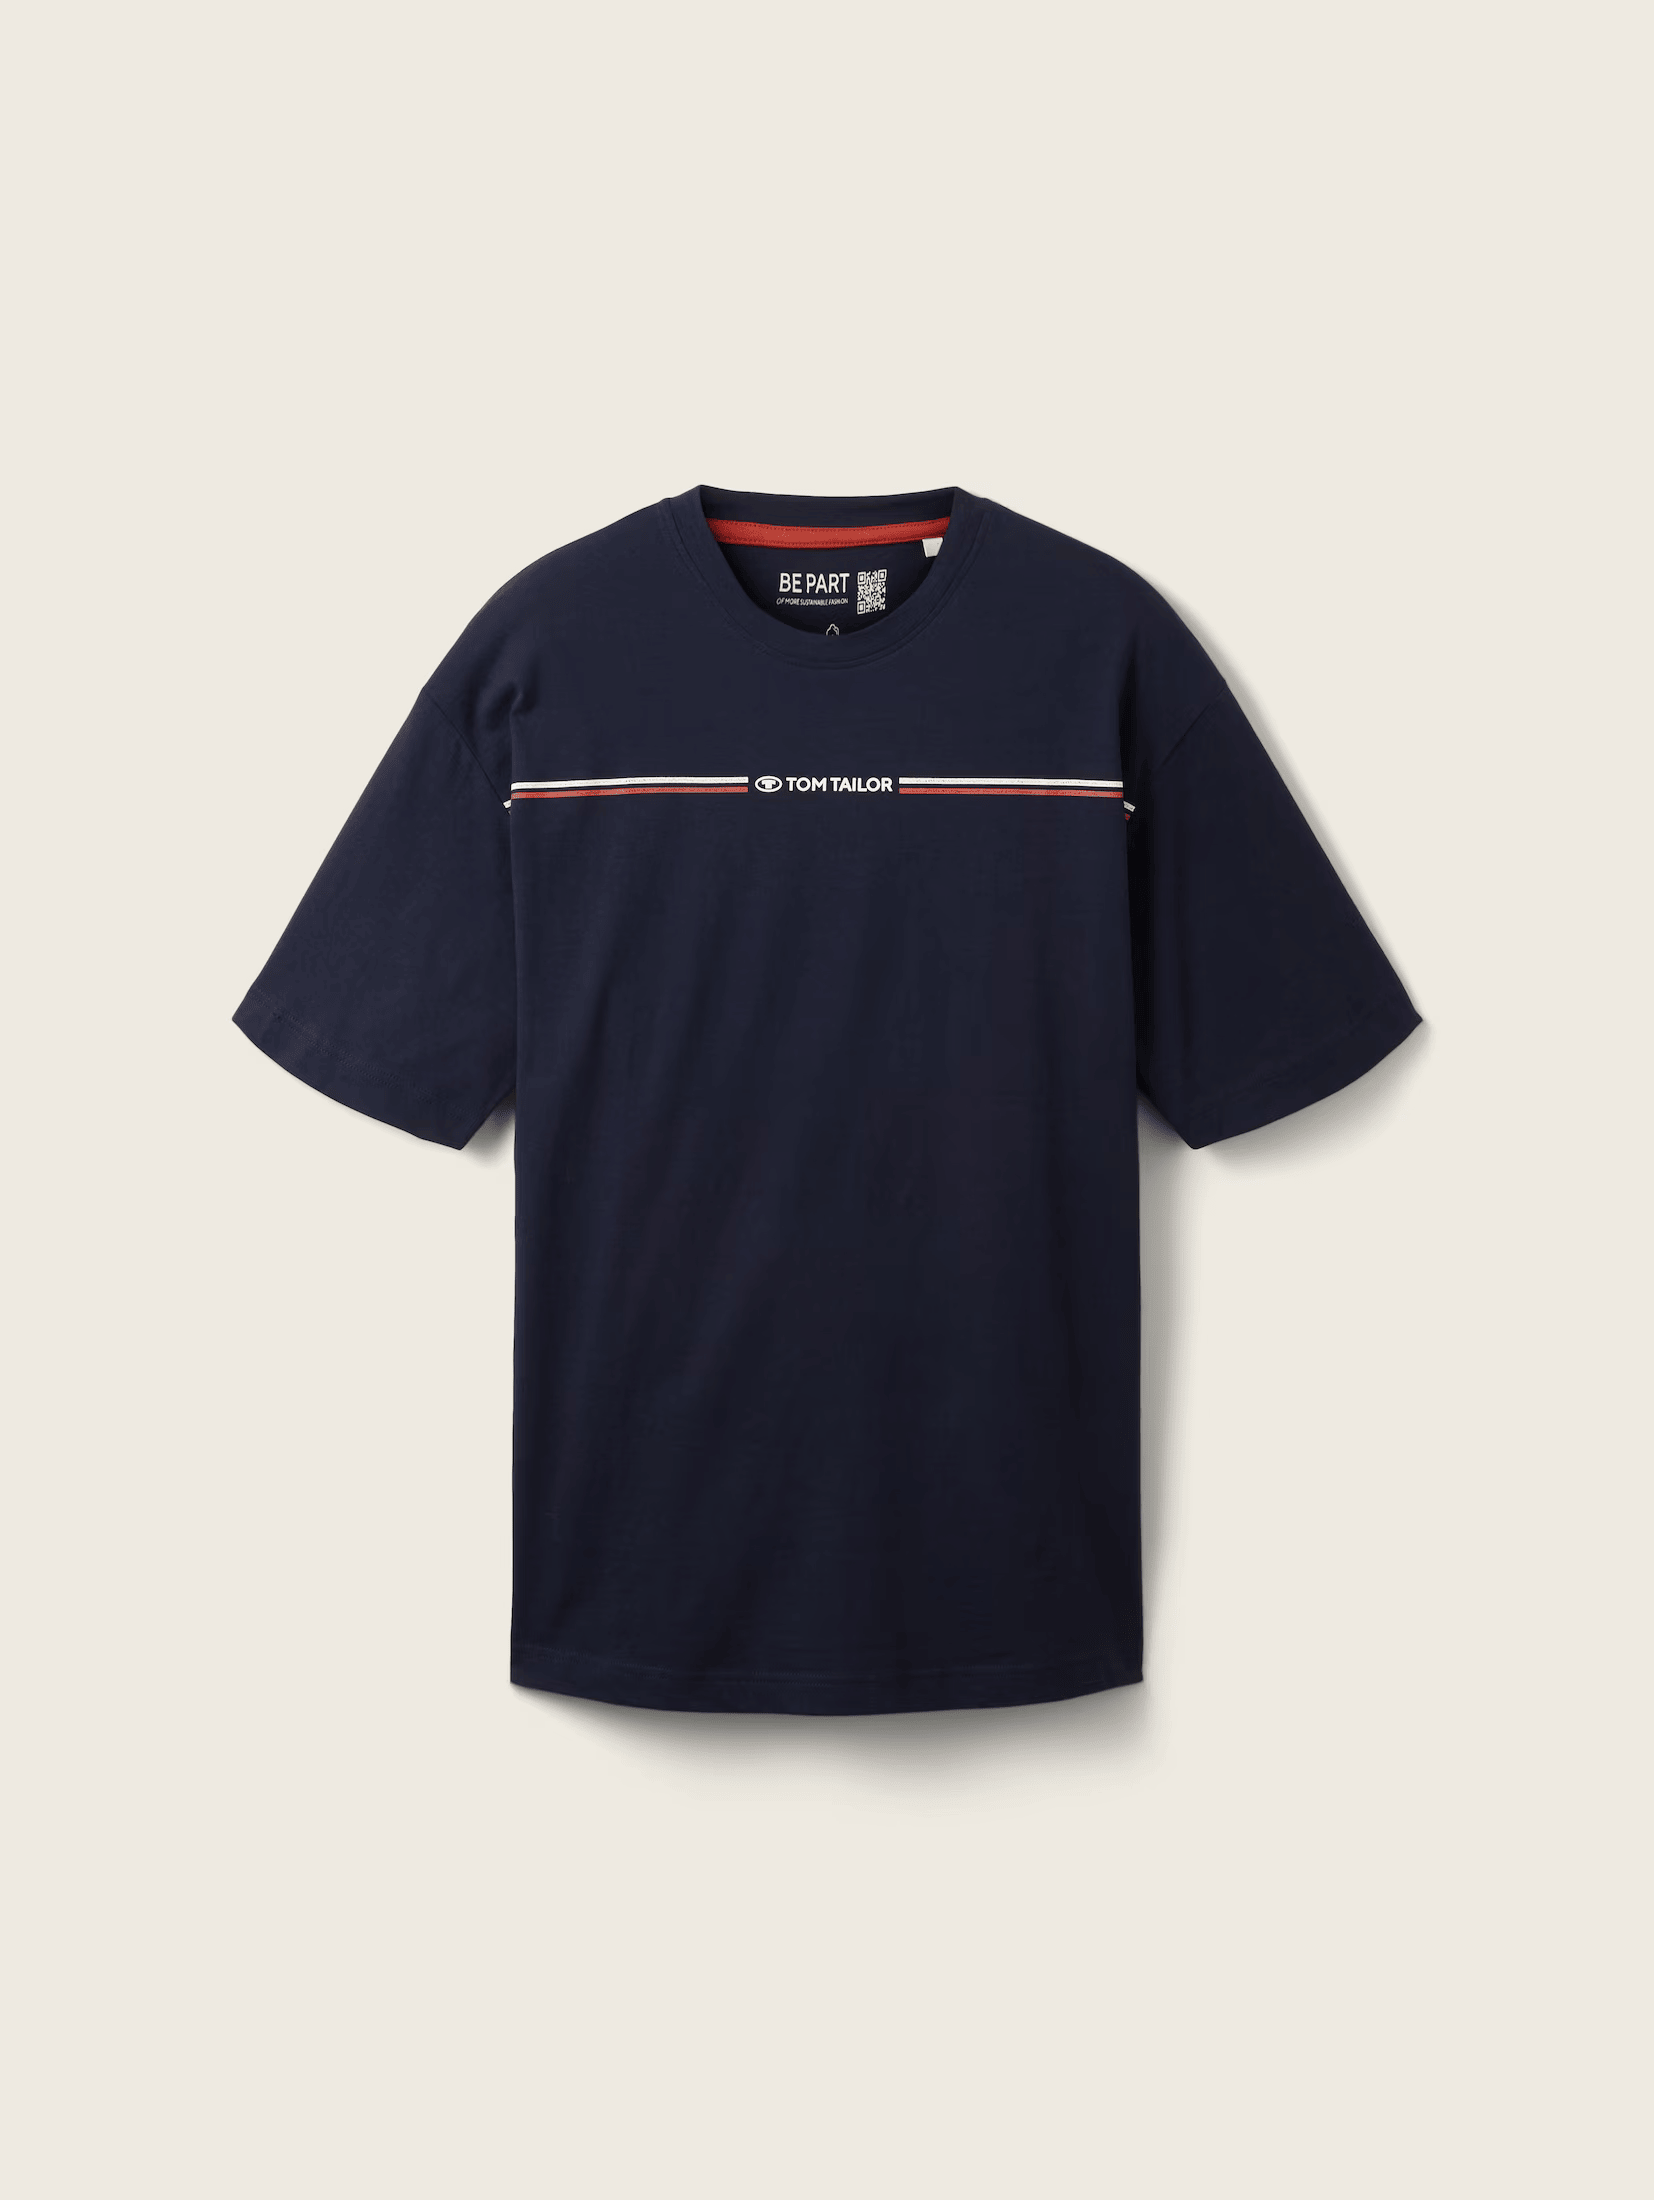 Tom Tailor Navy T-shirt With A Print